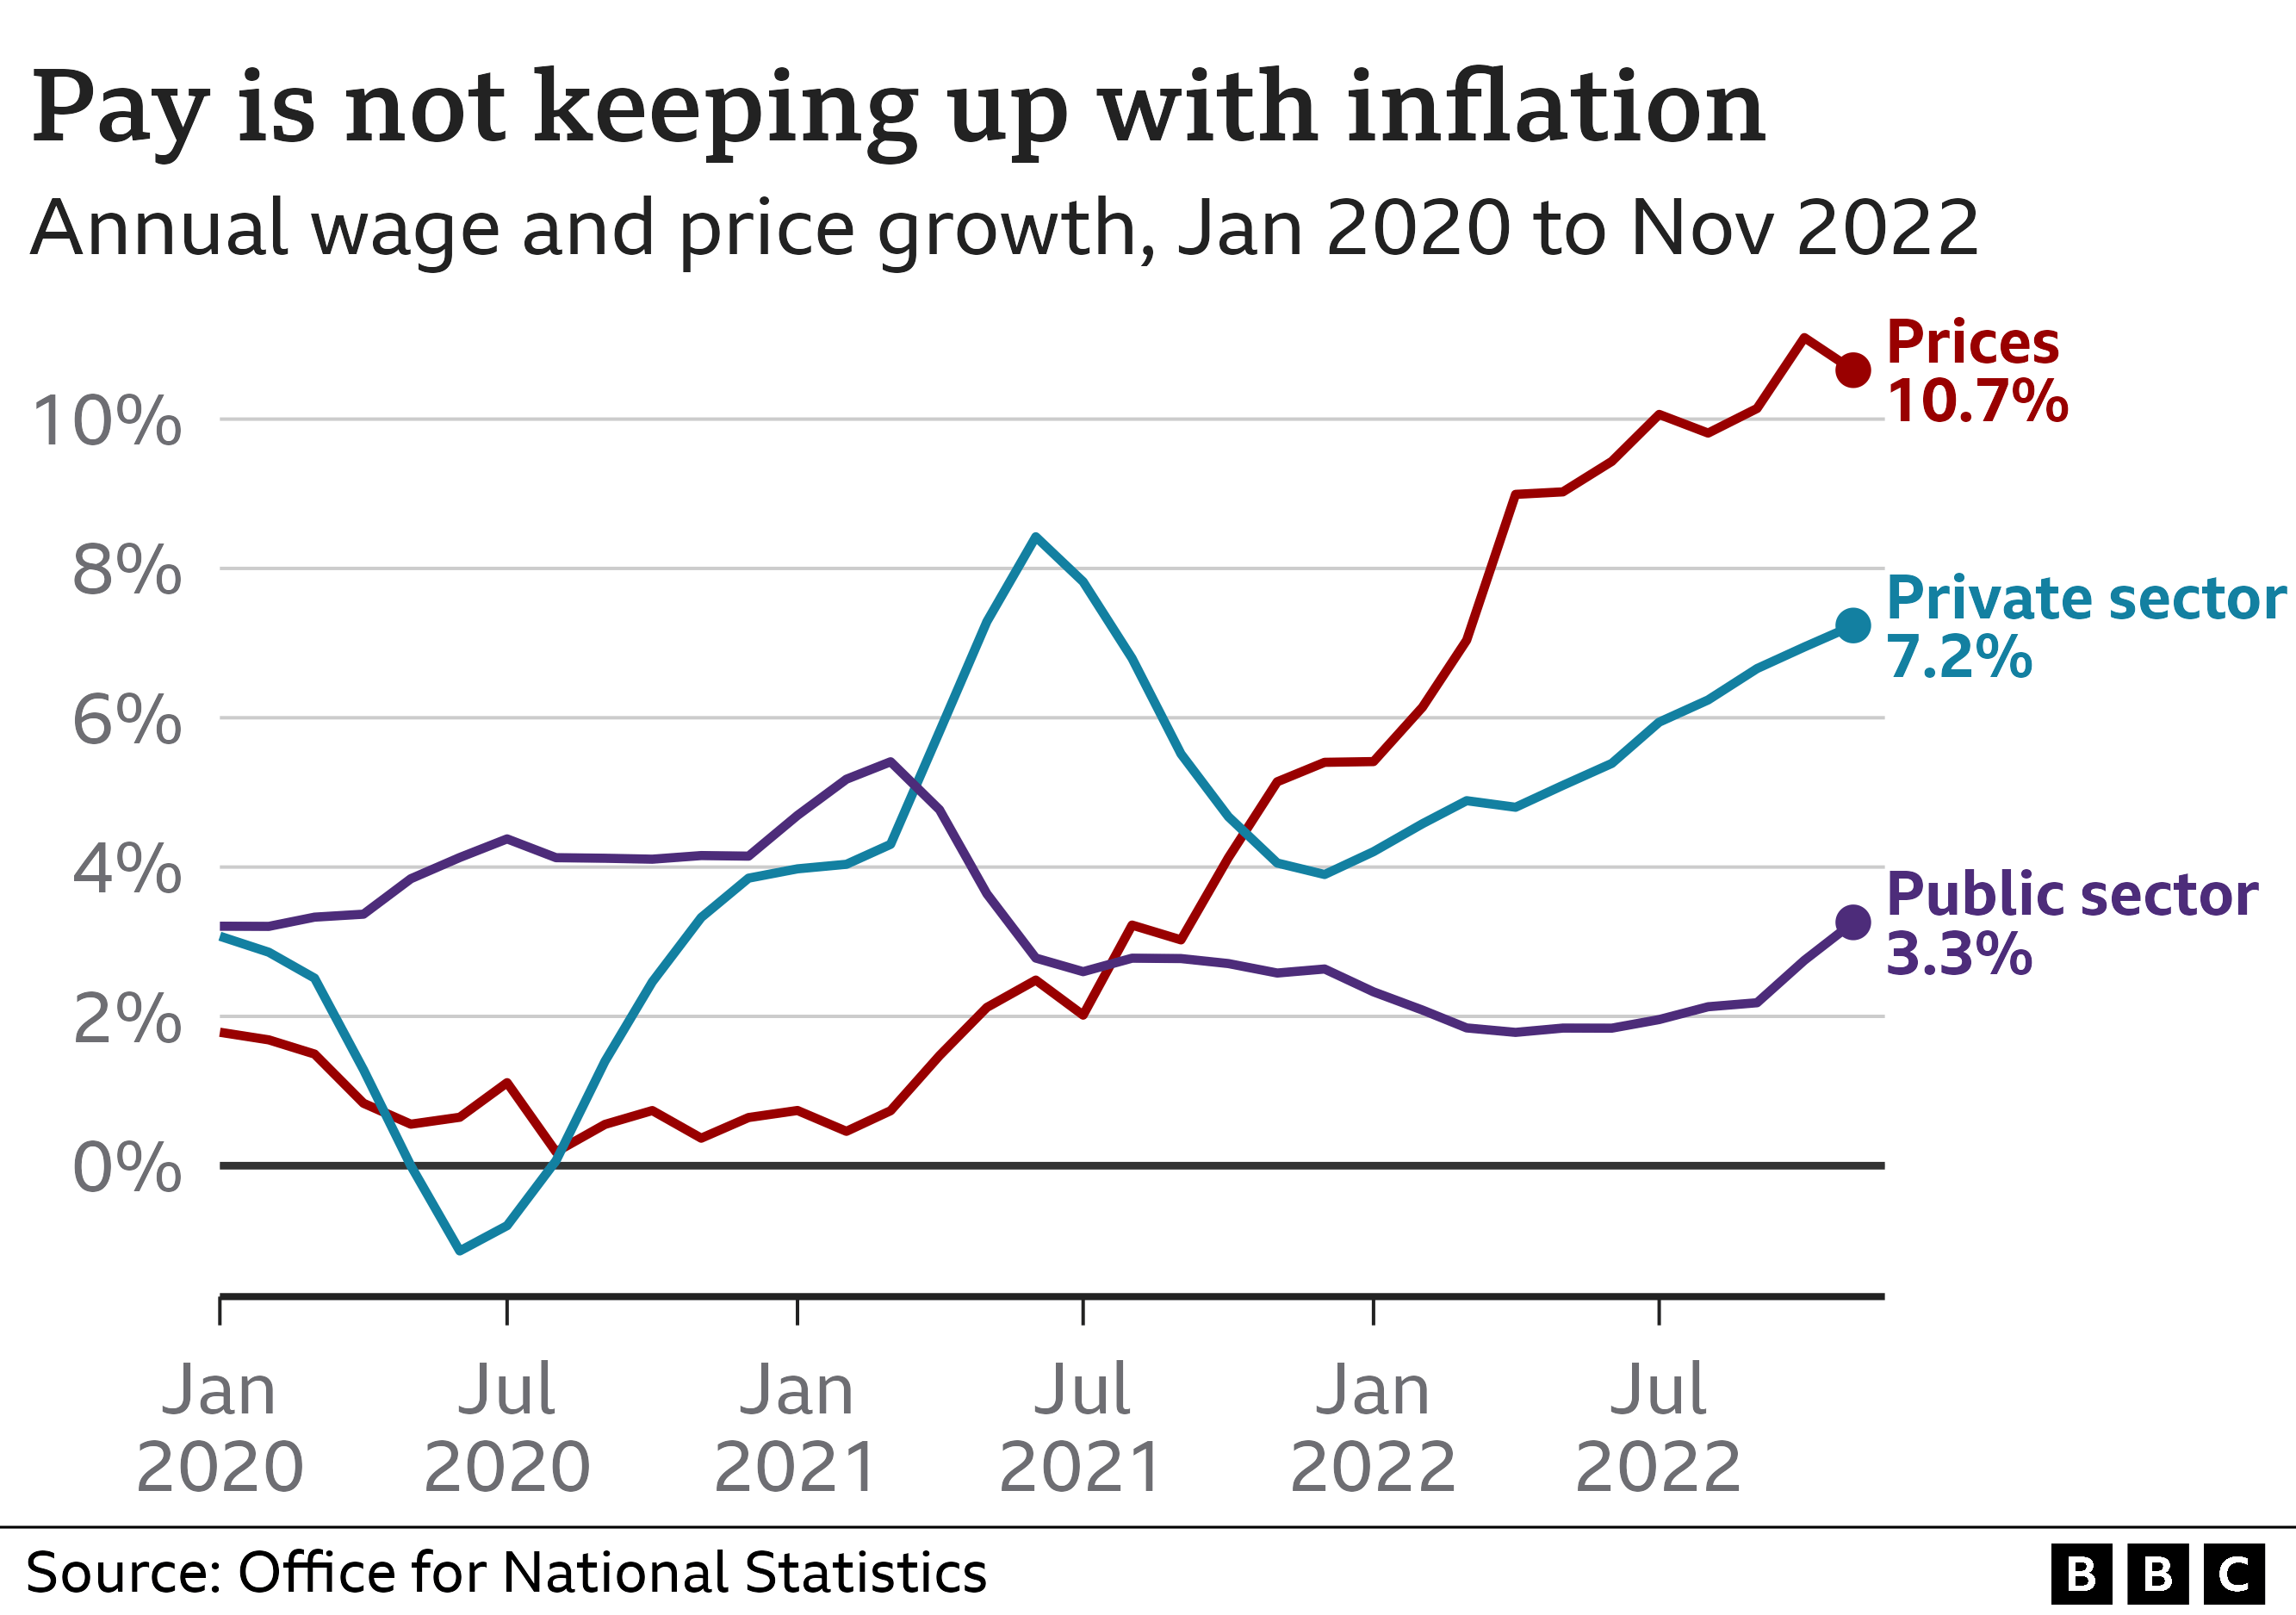 Graphic showing inflation and public and private sector pay growth